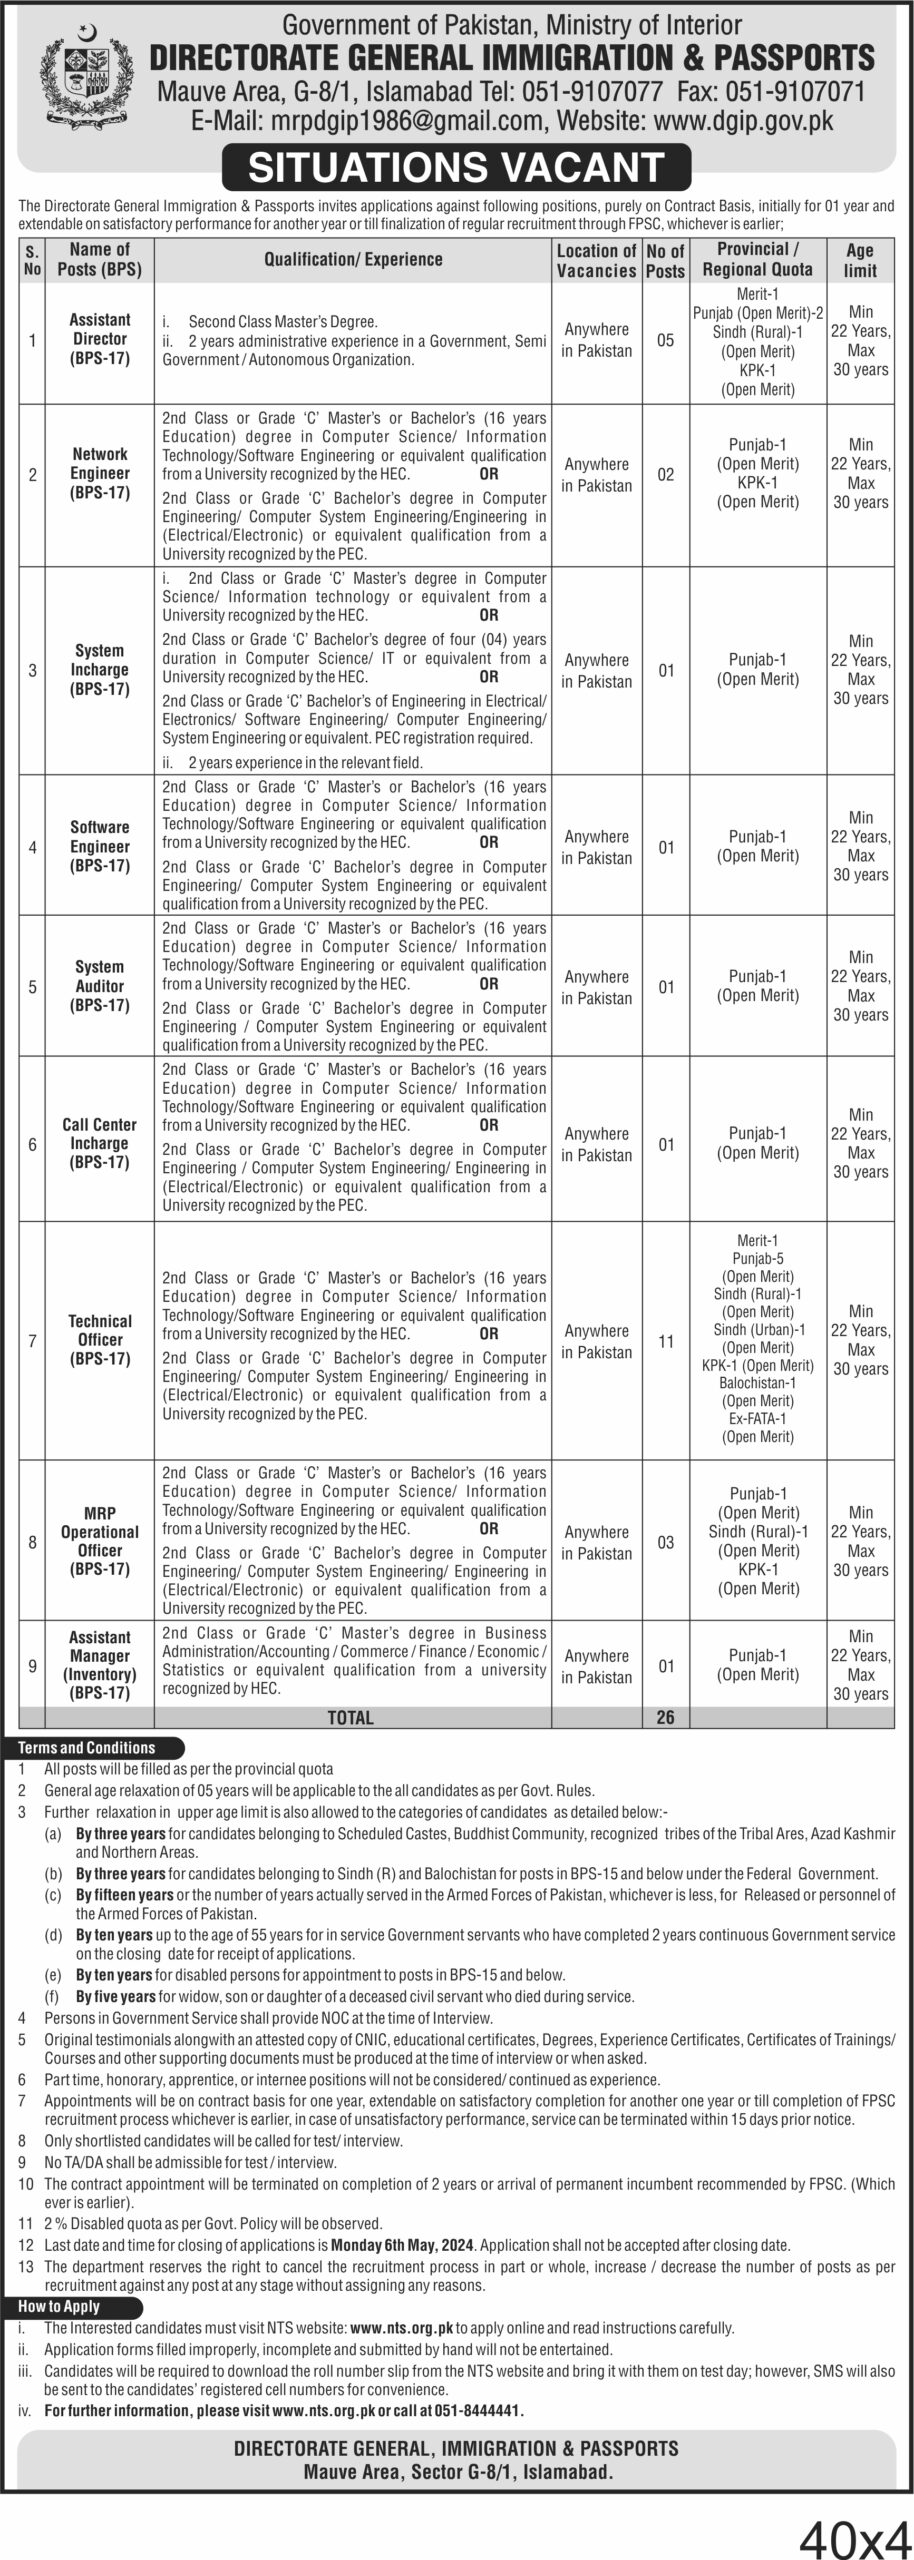 Directorate General Immigration & Passports, Islamabad Vacant Post (BS-17)